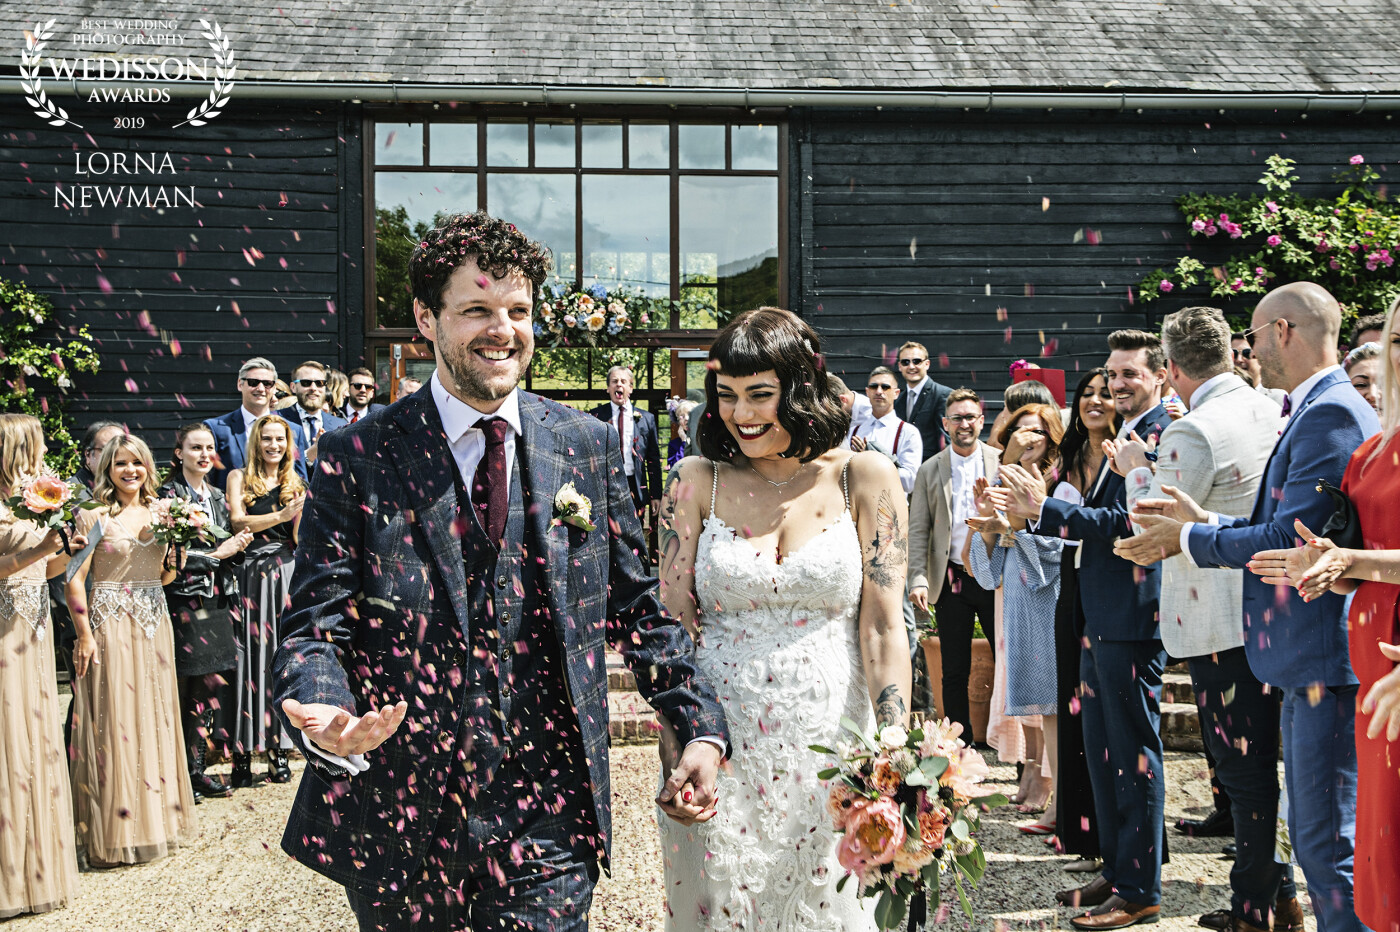 Krystle & her new lovely husband Mike had their beautiful wedding at Upwaltham Barns. This confetti shot was the standard mood of the day, it was smiles and laughs all day long in the beautiful Sussex countryside.<br />
They even had a rainbow!<br />
<br />
Congratulations Krystle & Mike wish you so much happiness.